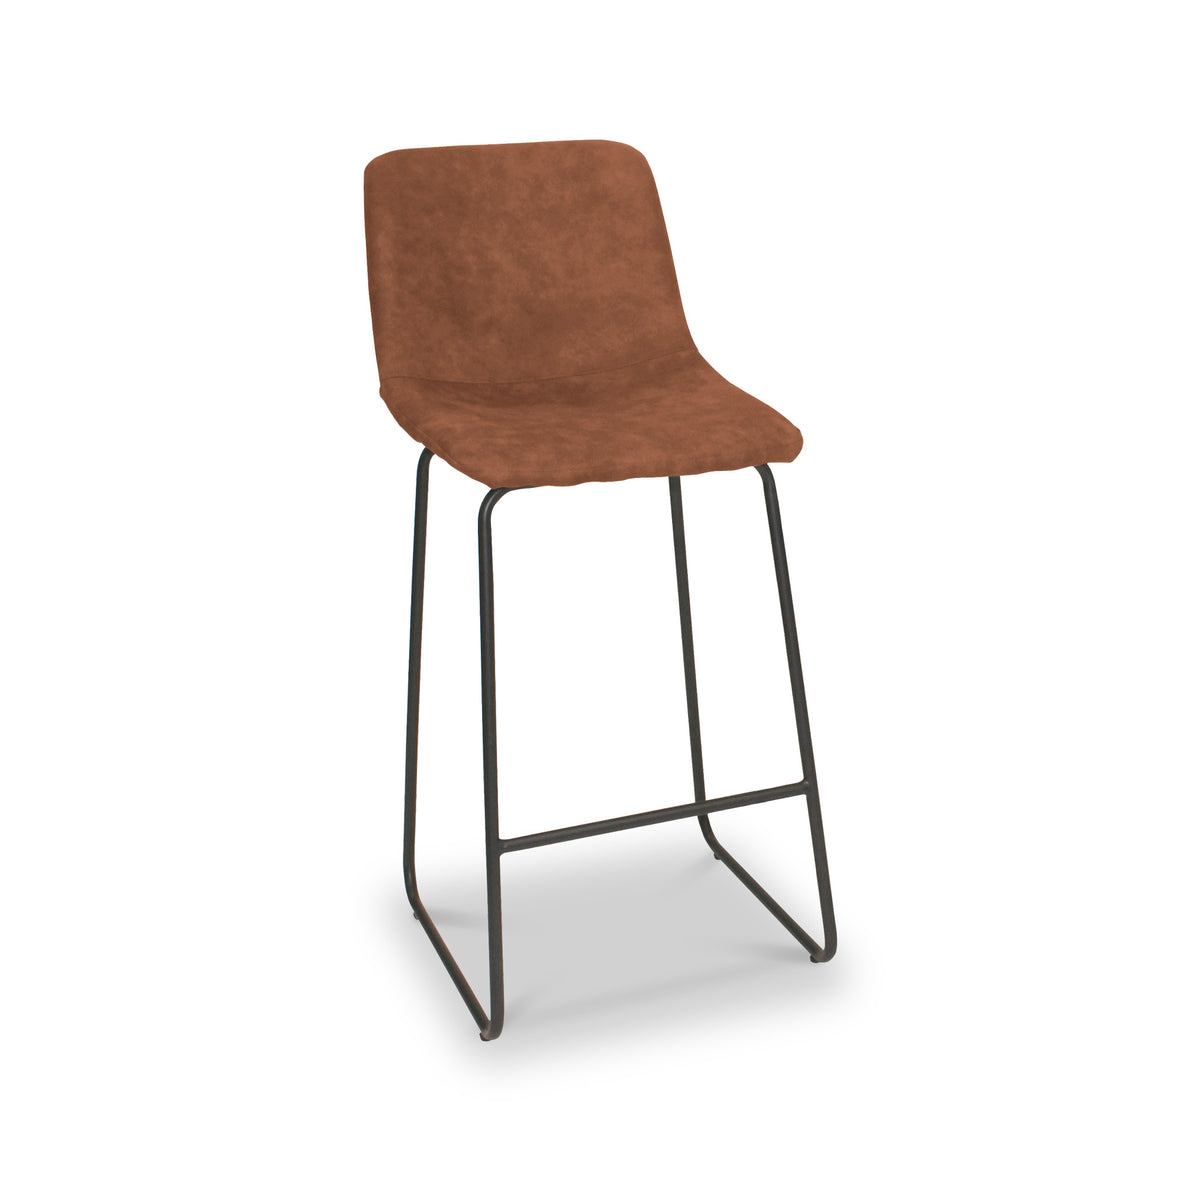 Maren Tan Faux Leather Bar Stool from Roseland